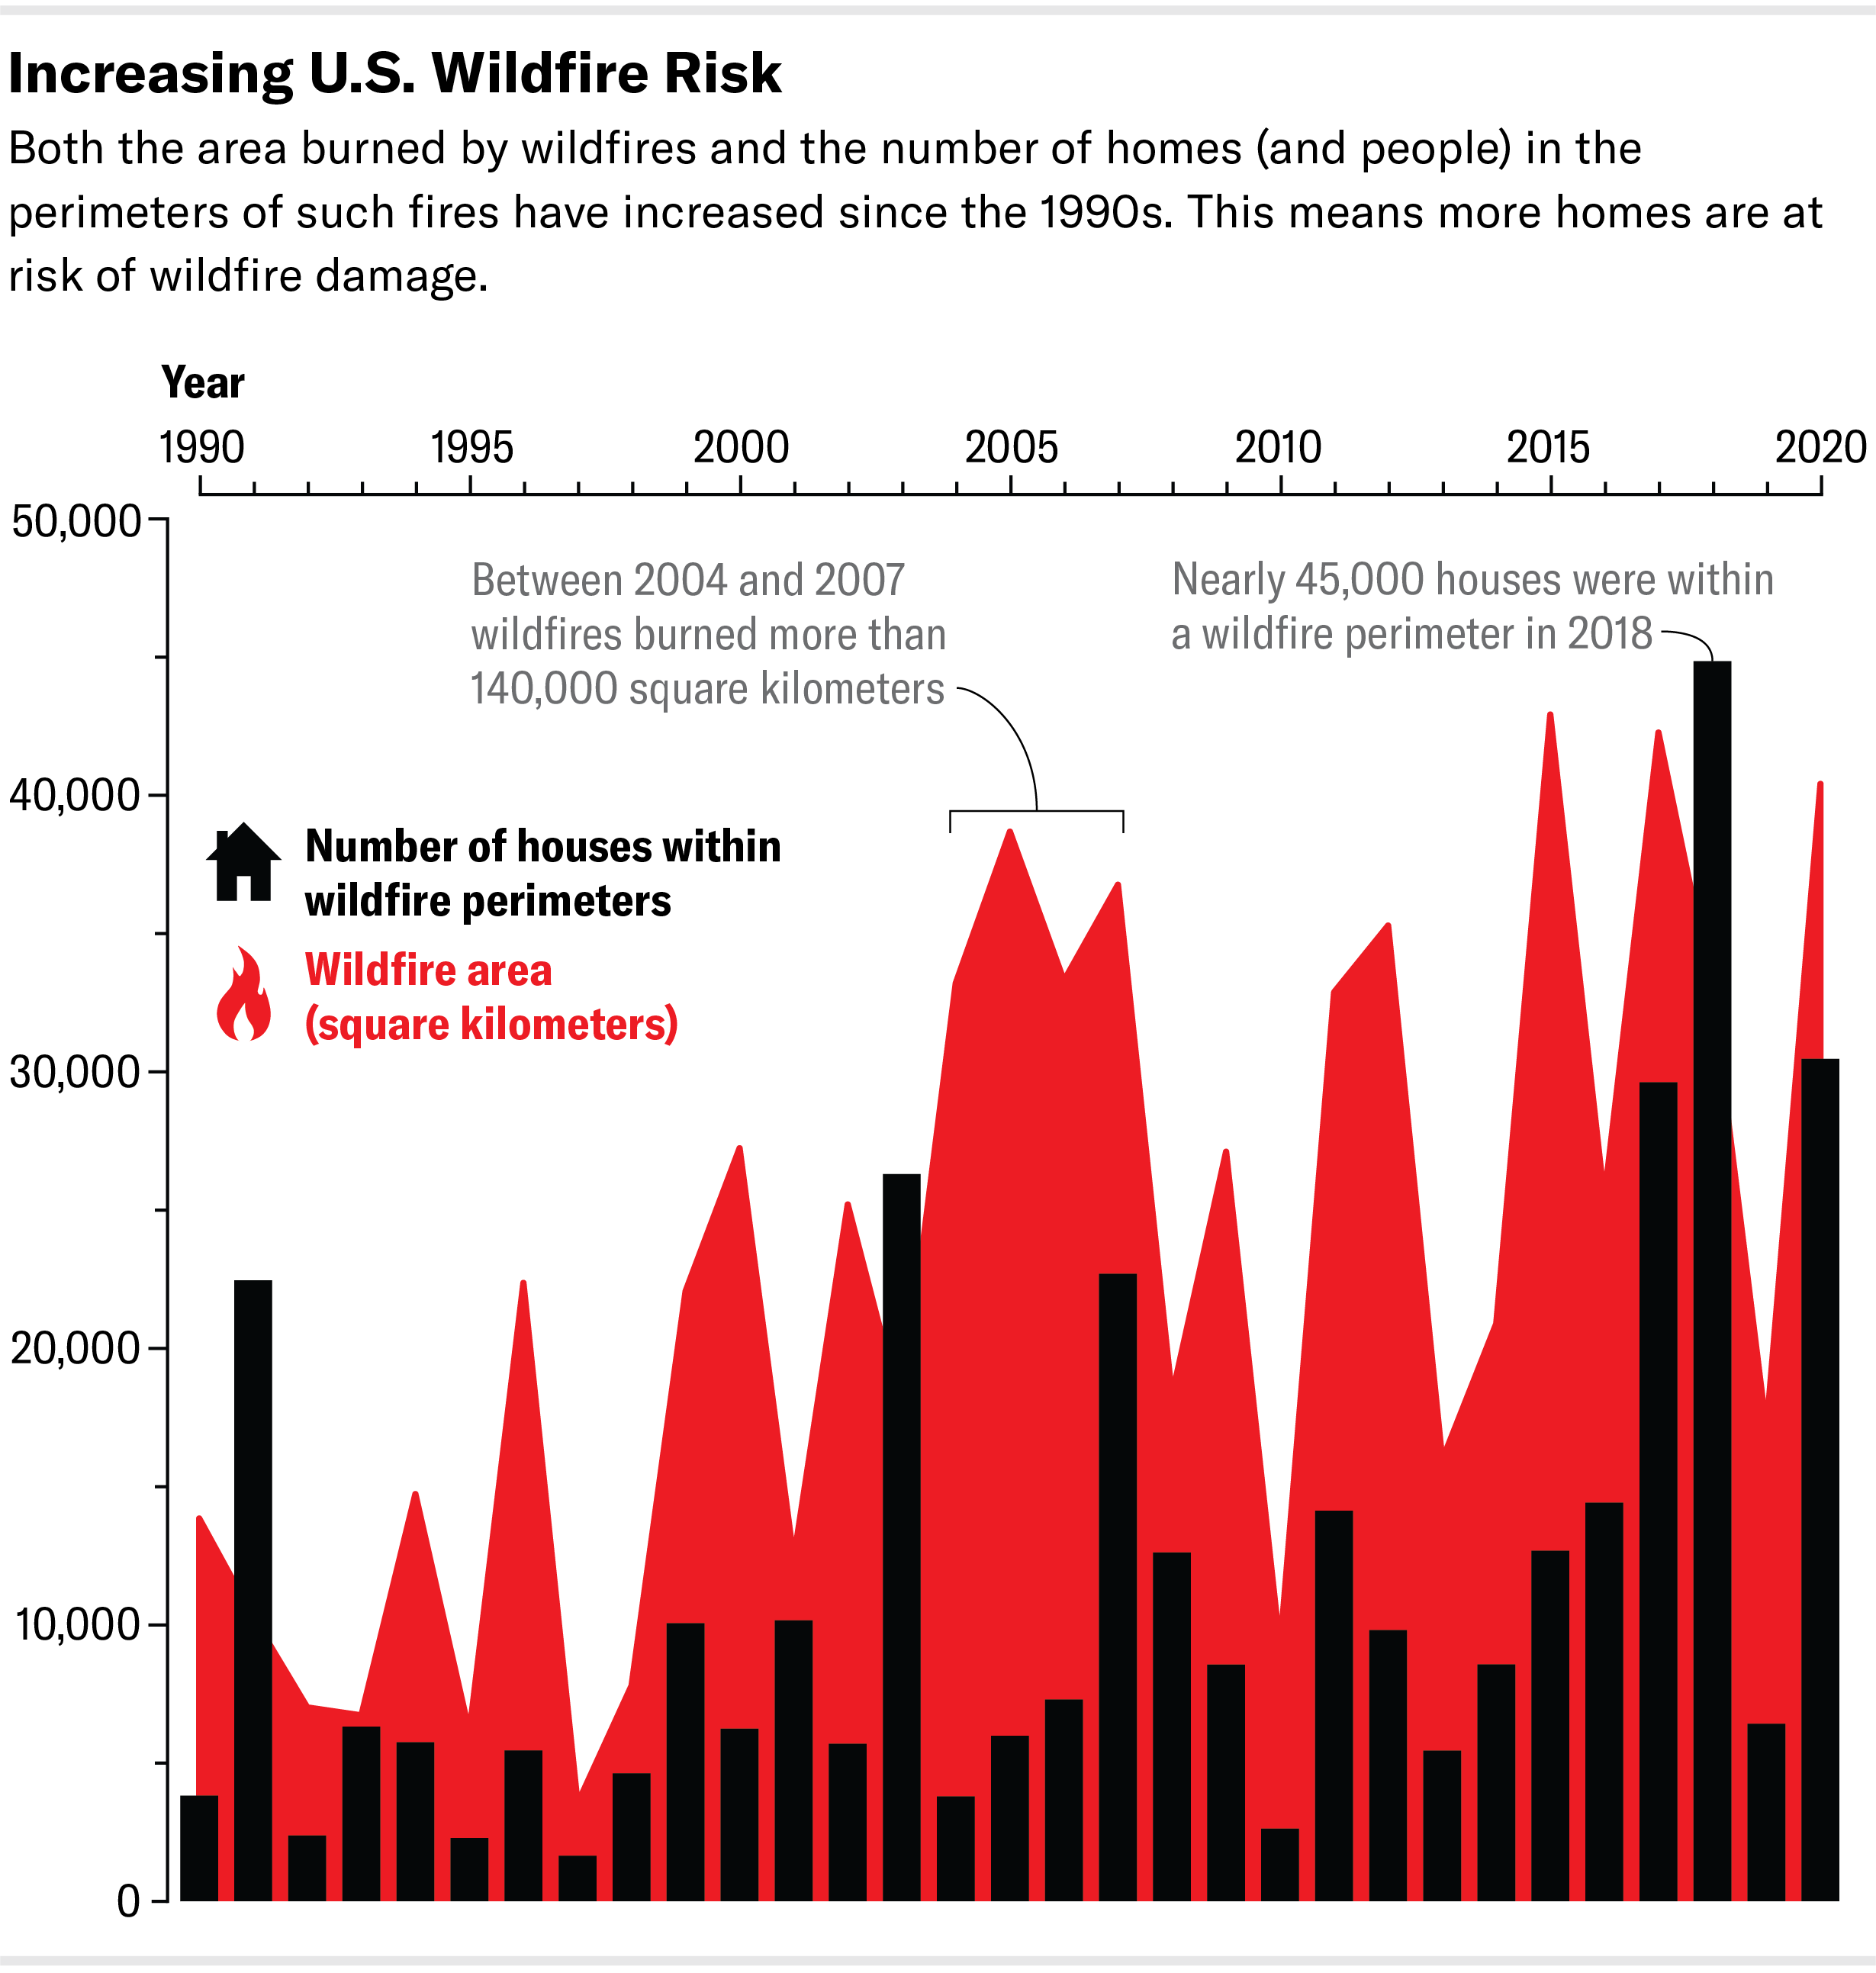 Chart shows how two variables change over time. Area of land burned by wildfires is represented as an area chart while the number of houses within the perimeter of wildfires is represented as a vertical bar chart. Both variables increase over time, though they fluctuate from year to year.